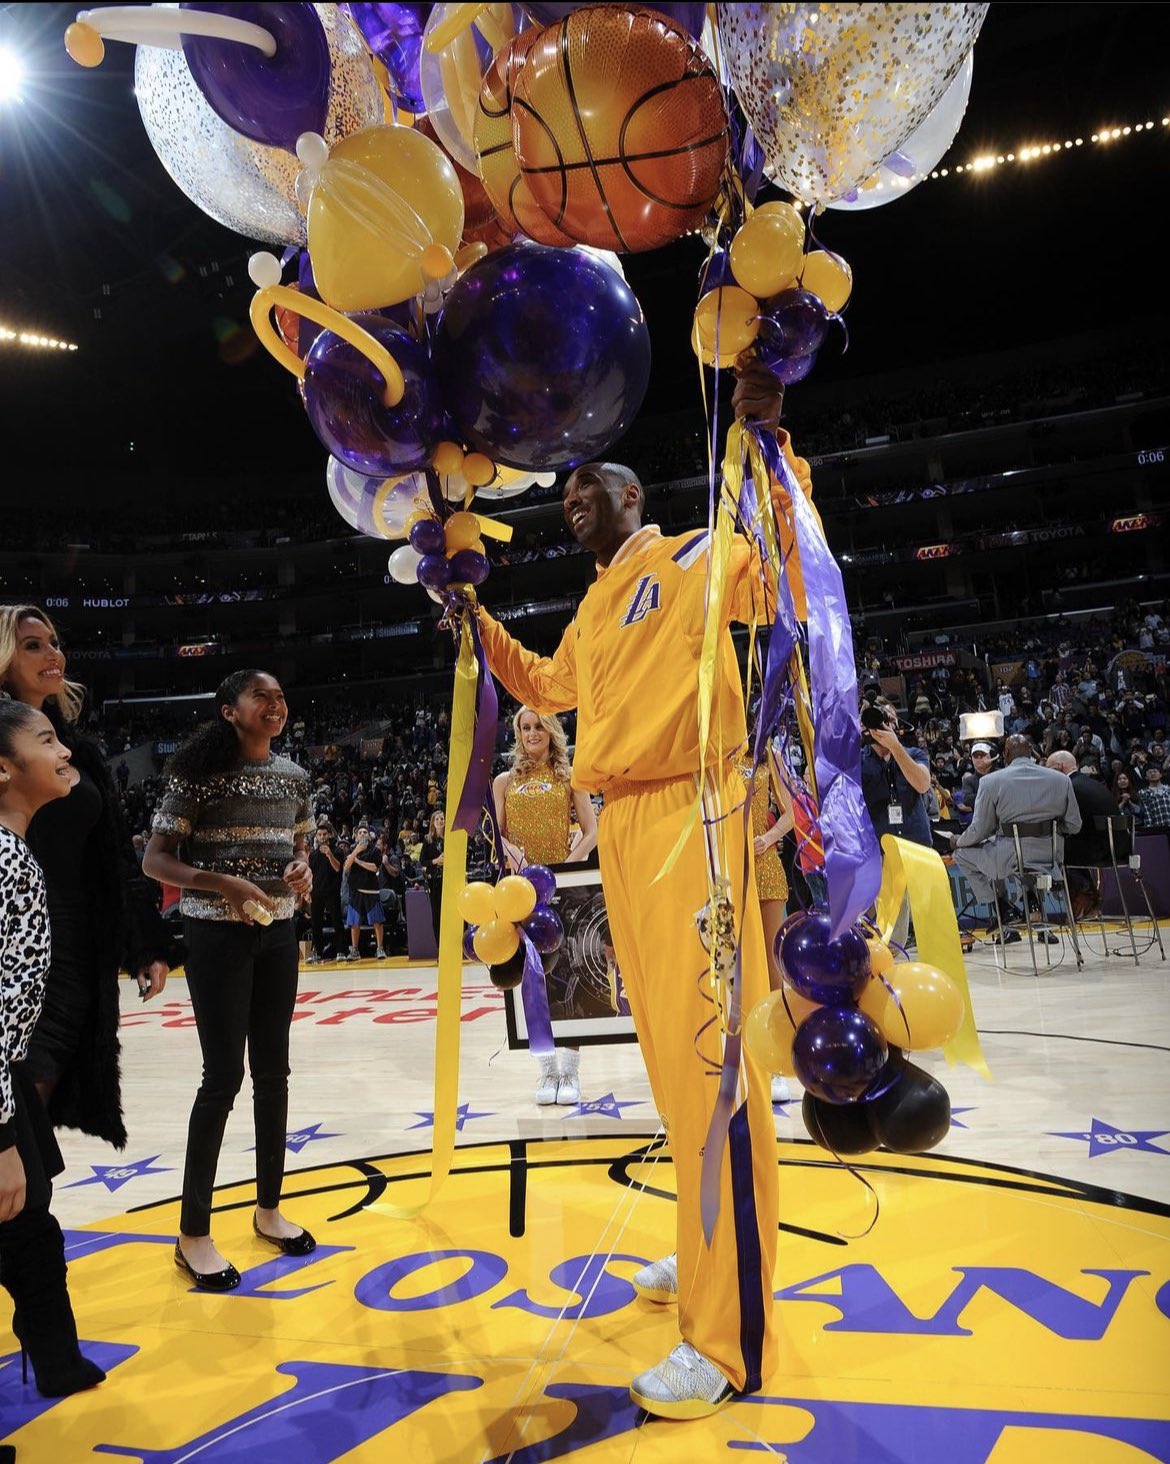 LA Lakers honor LeBron James in pregame ceremony game after